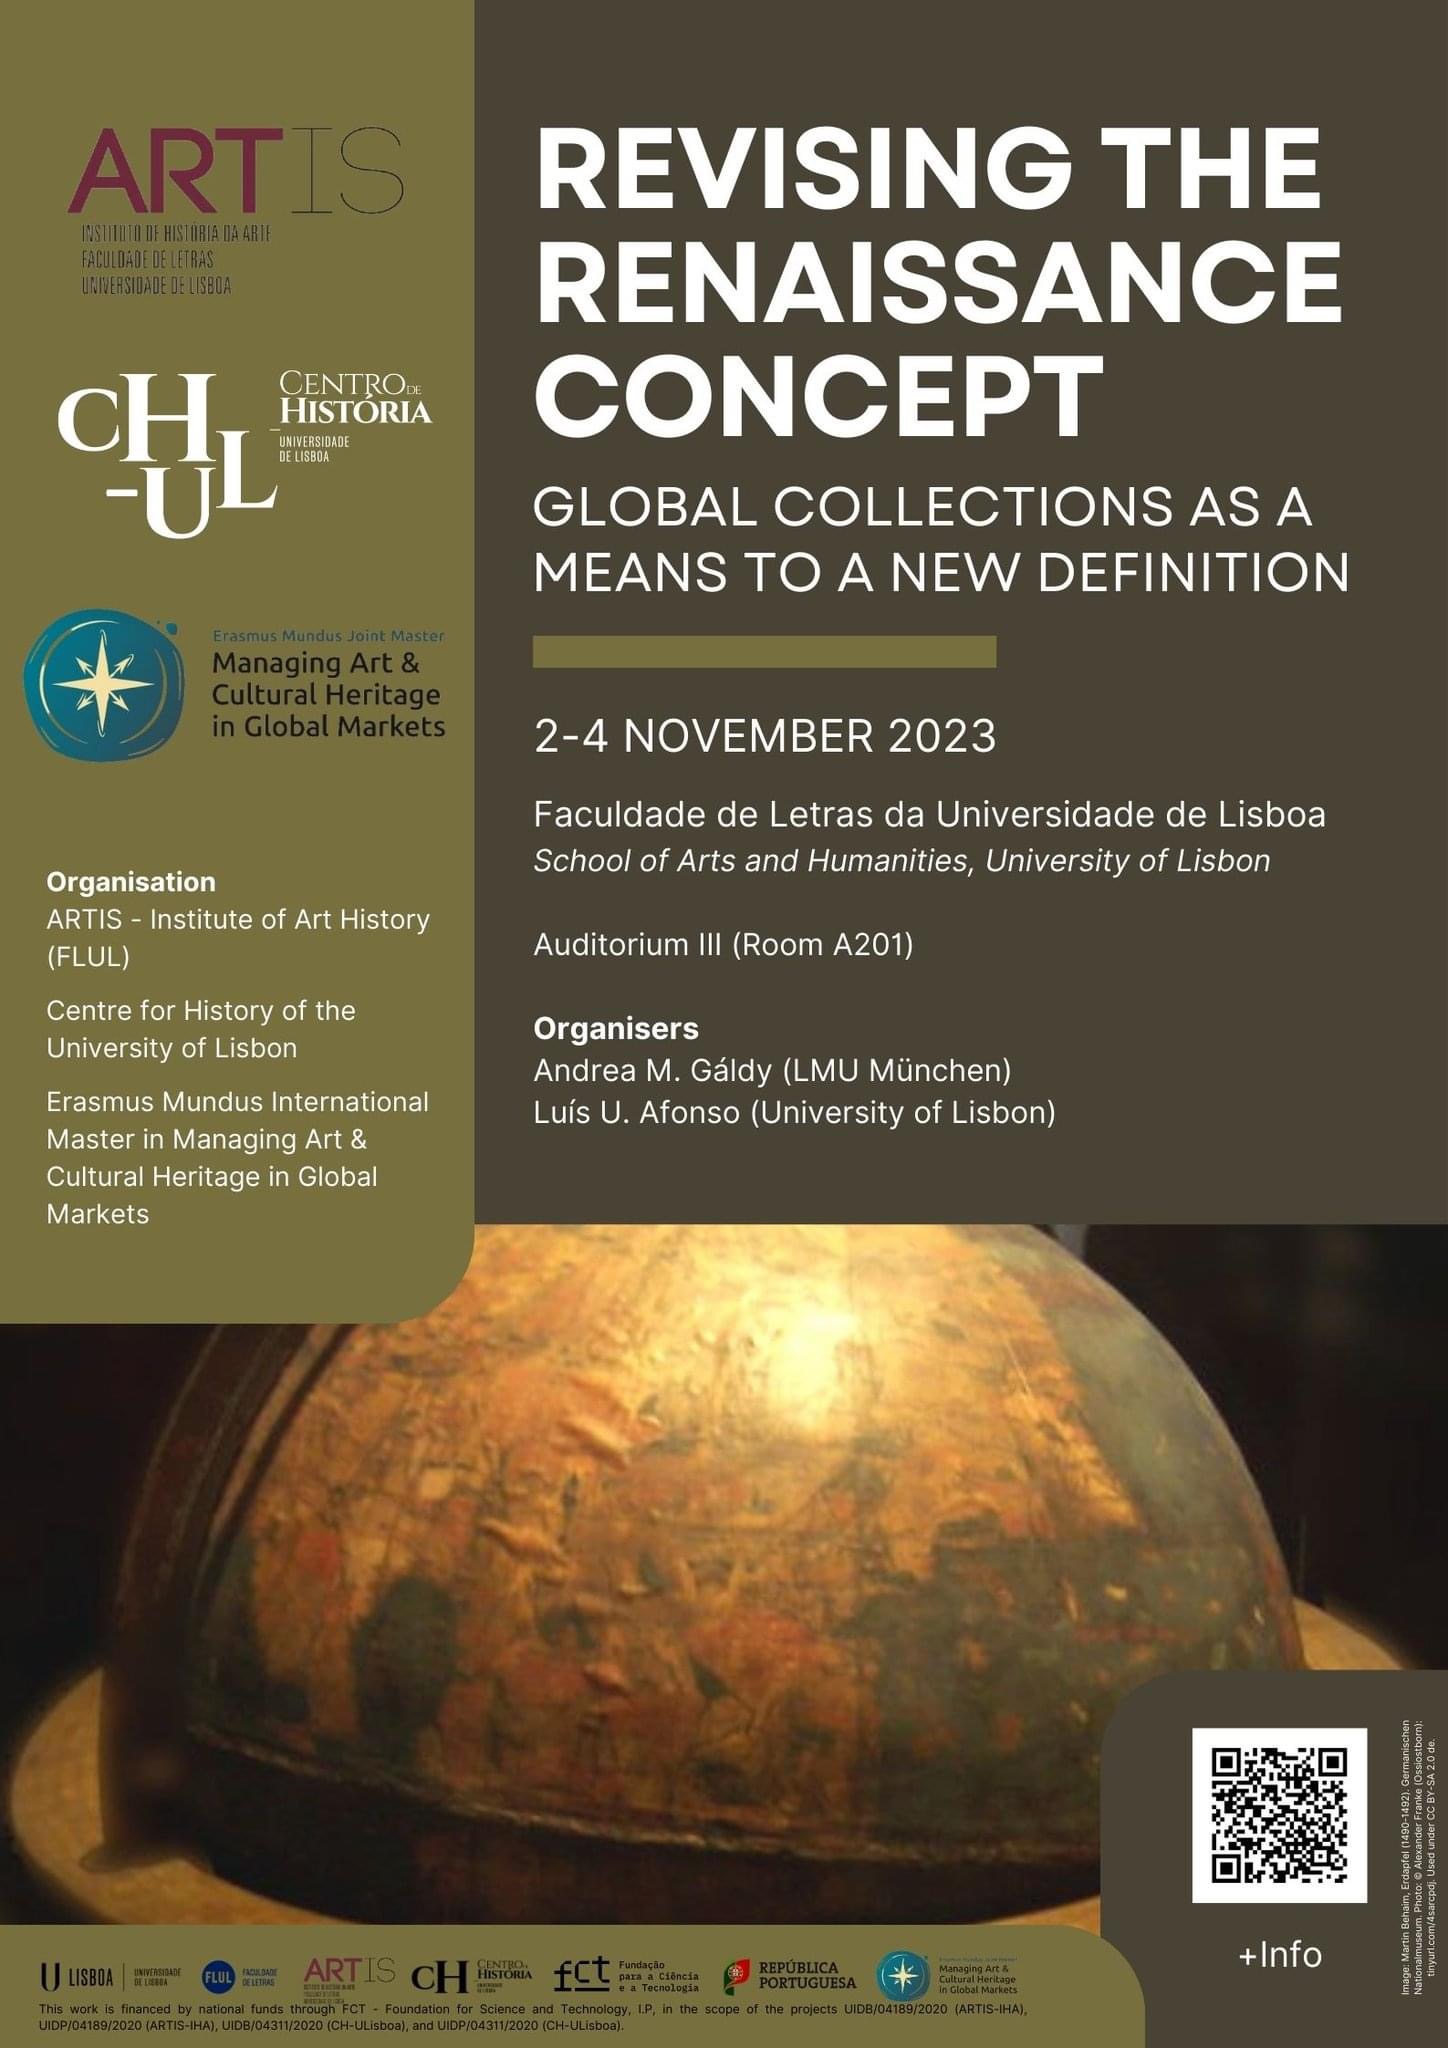 Revising the Renaissance Concept: Global Collections as a Means to a New Definition